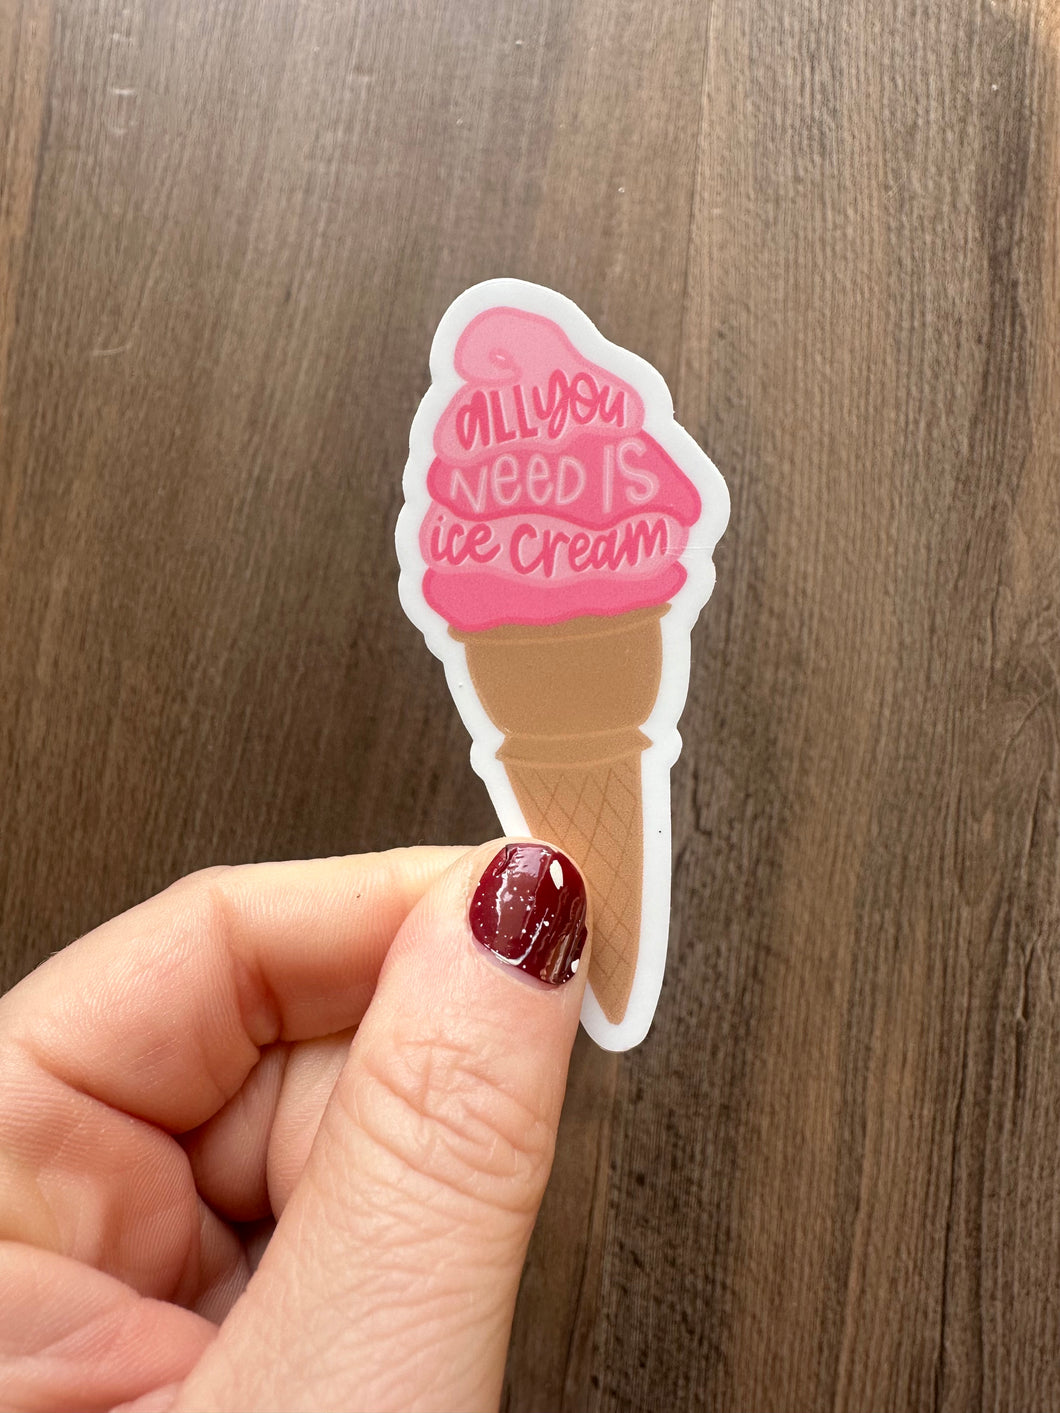 All you need is Ice Cream Sticker